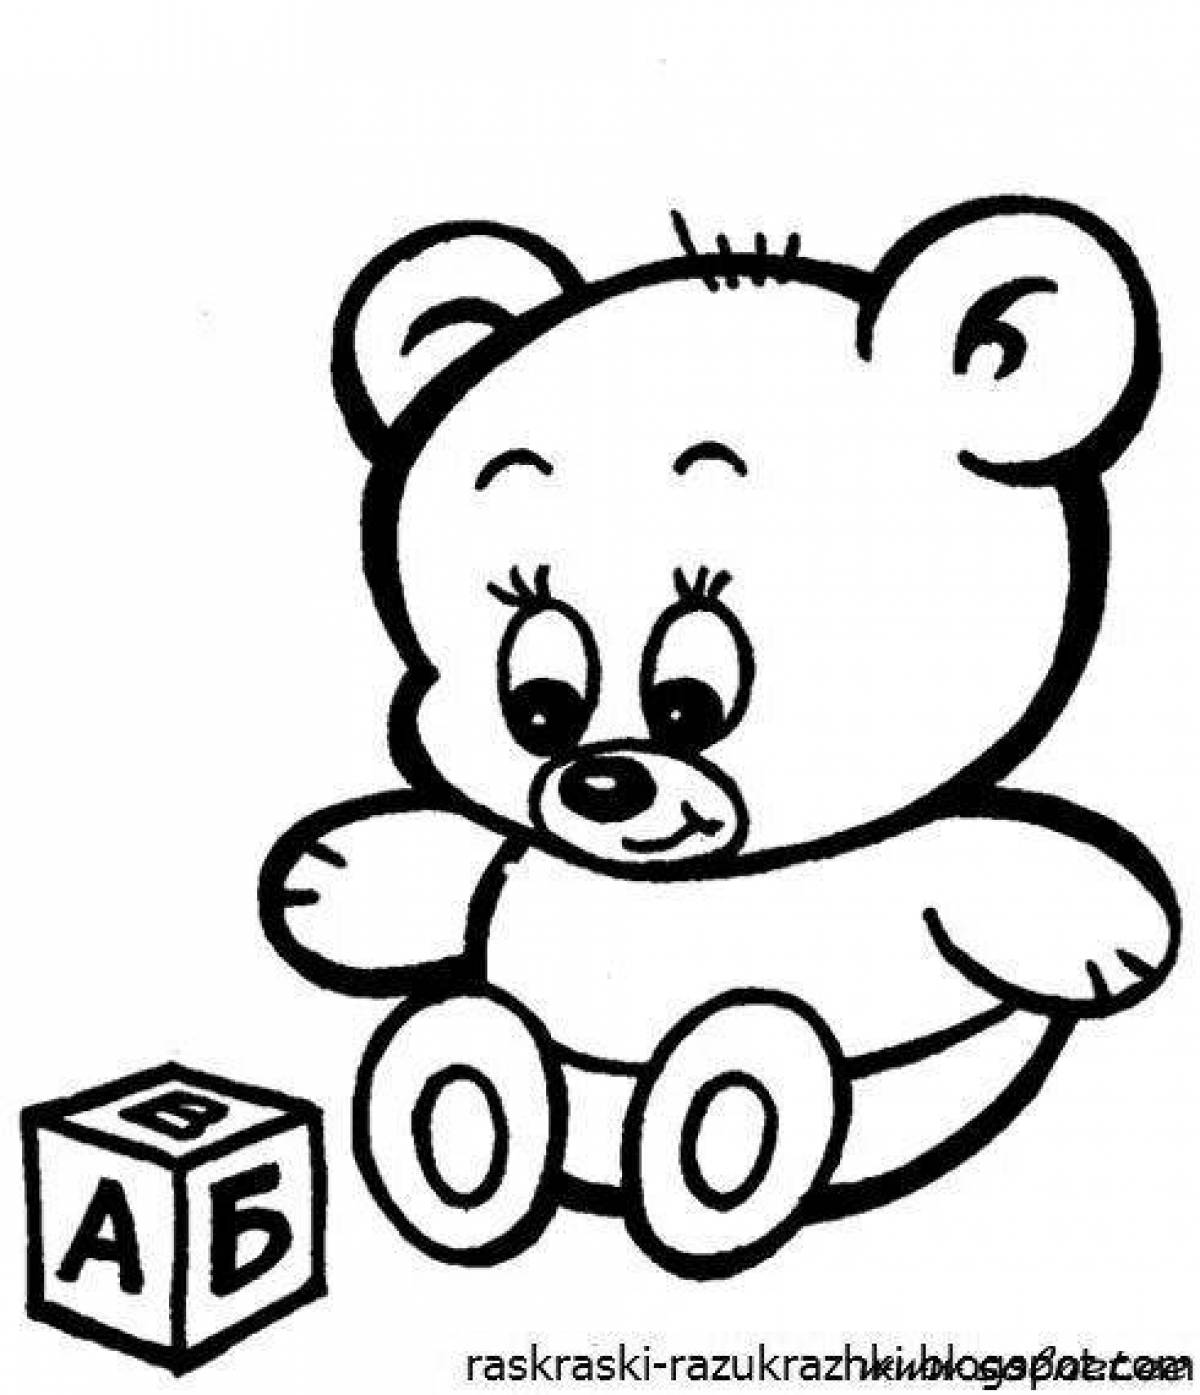 Live teddy bear coloring book for kids